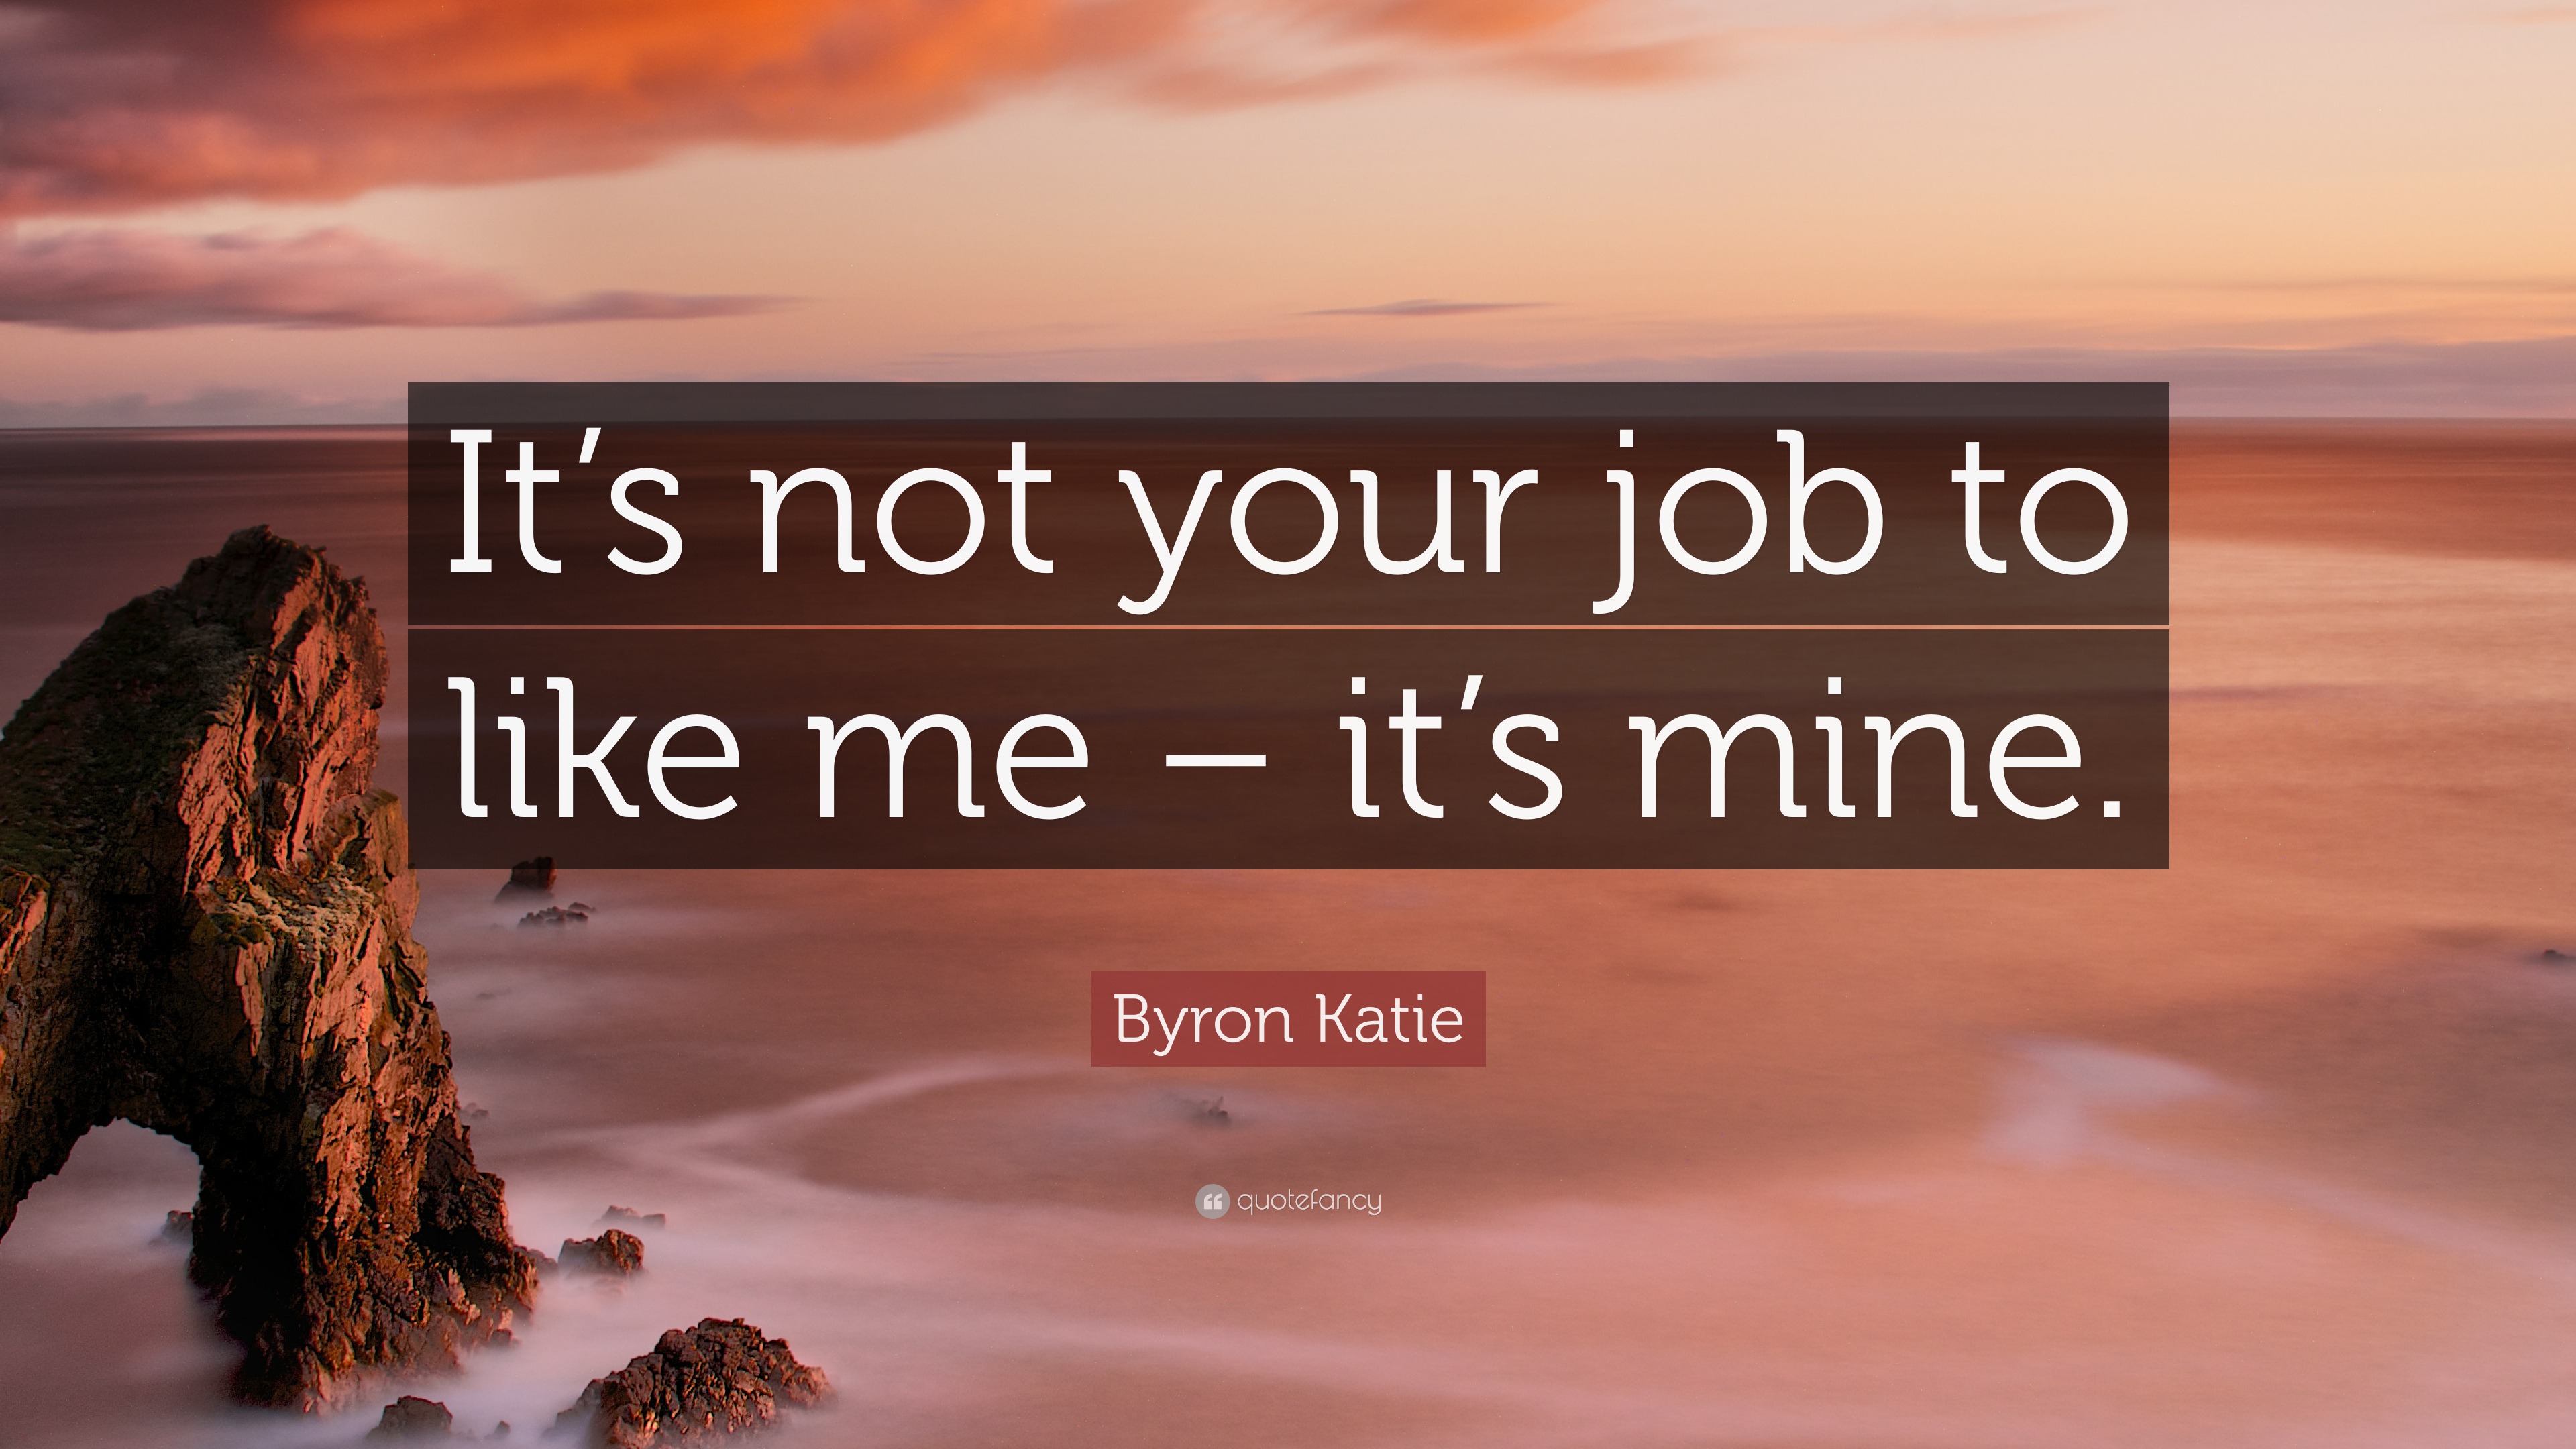 Byron Katie Quote: “It’s not your job to like me – it’s mine.” (22